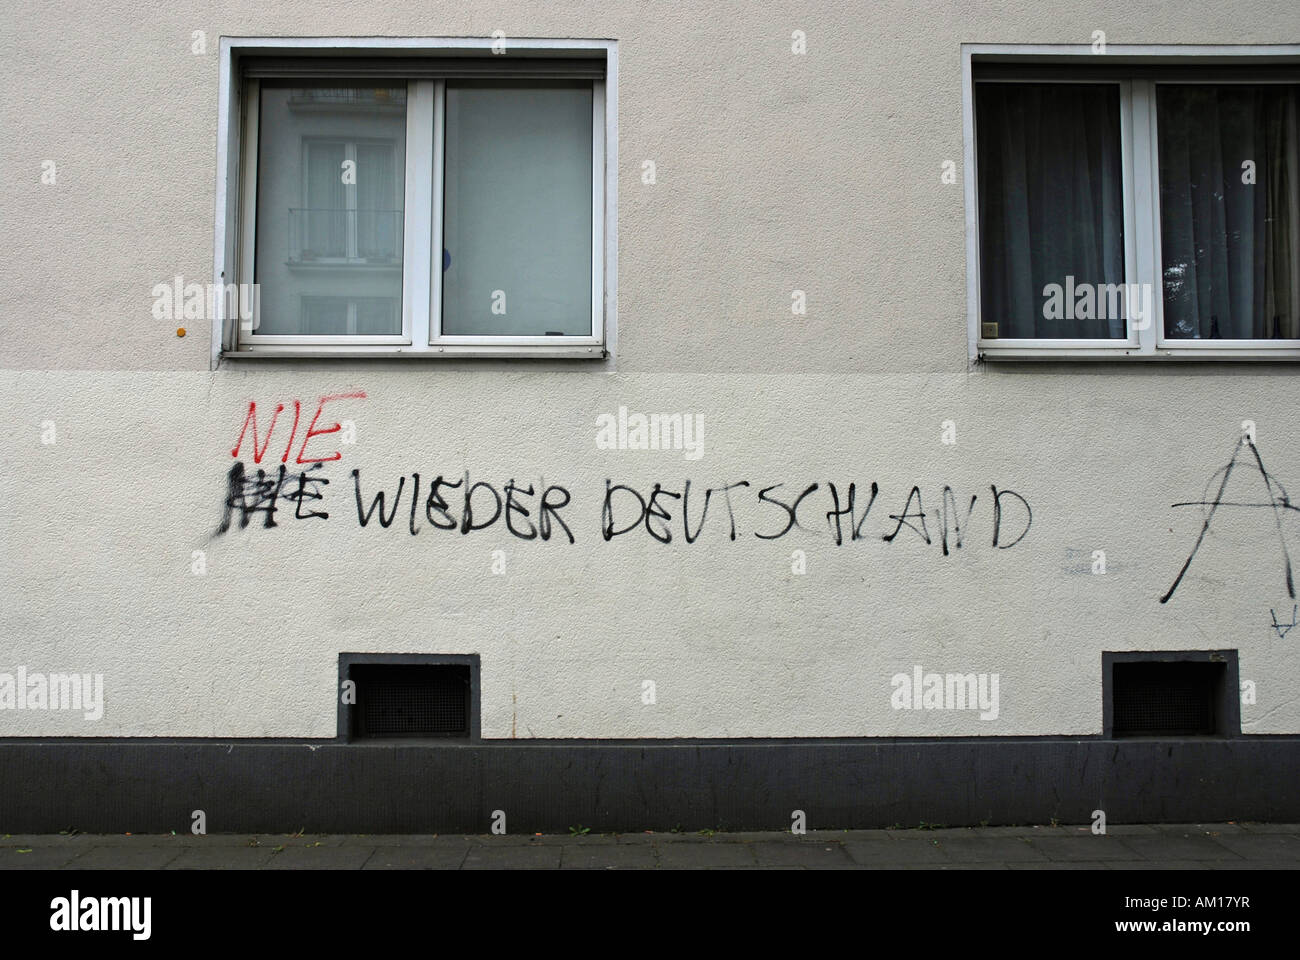 House wall with writing "Nie Wieder Deutschland", Cologne-Muehlheim, Germany Stock Photo